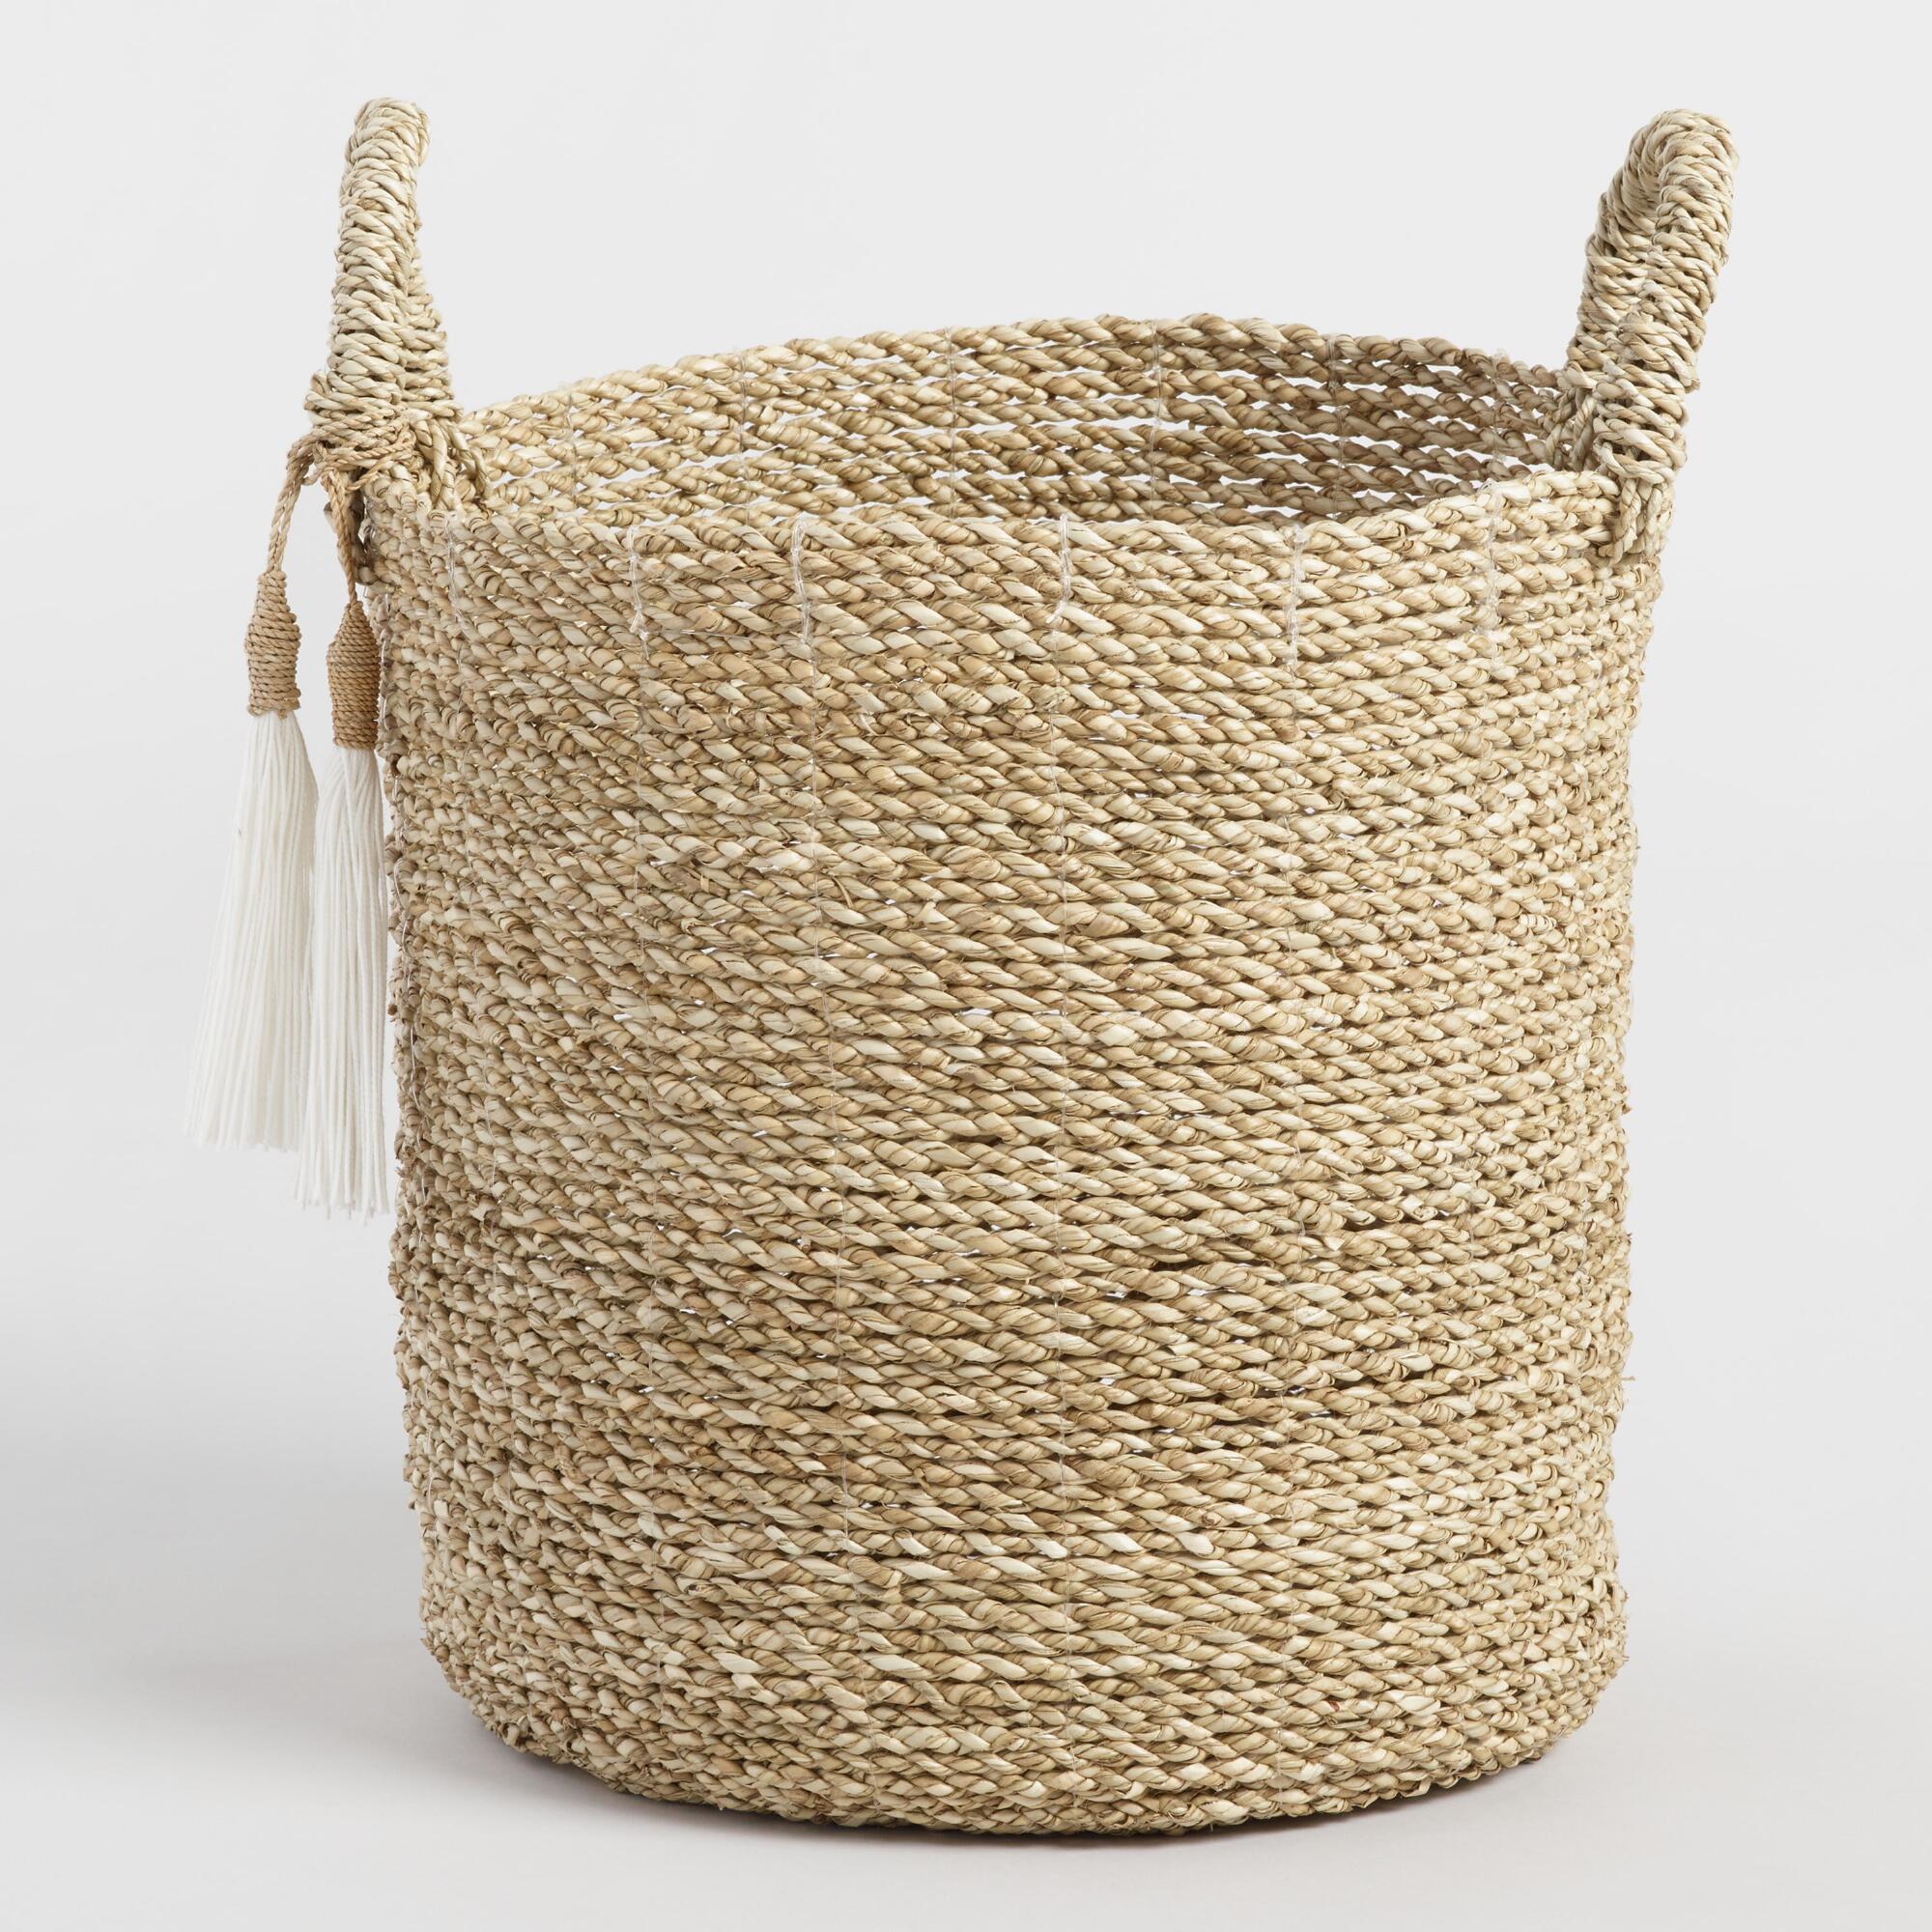 Small Seagrass Delilah Tote Basket with Tassels | World Market